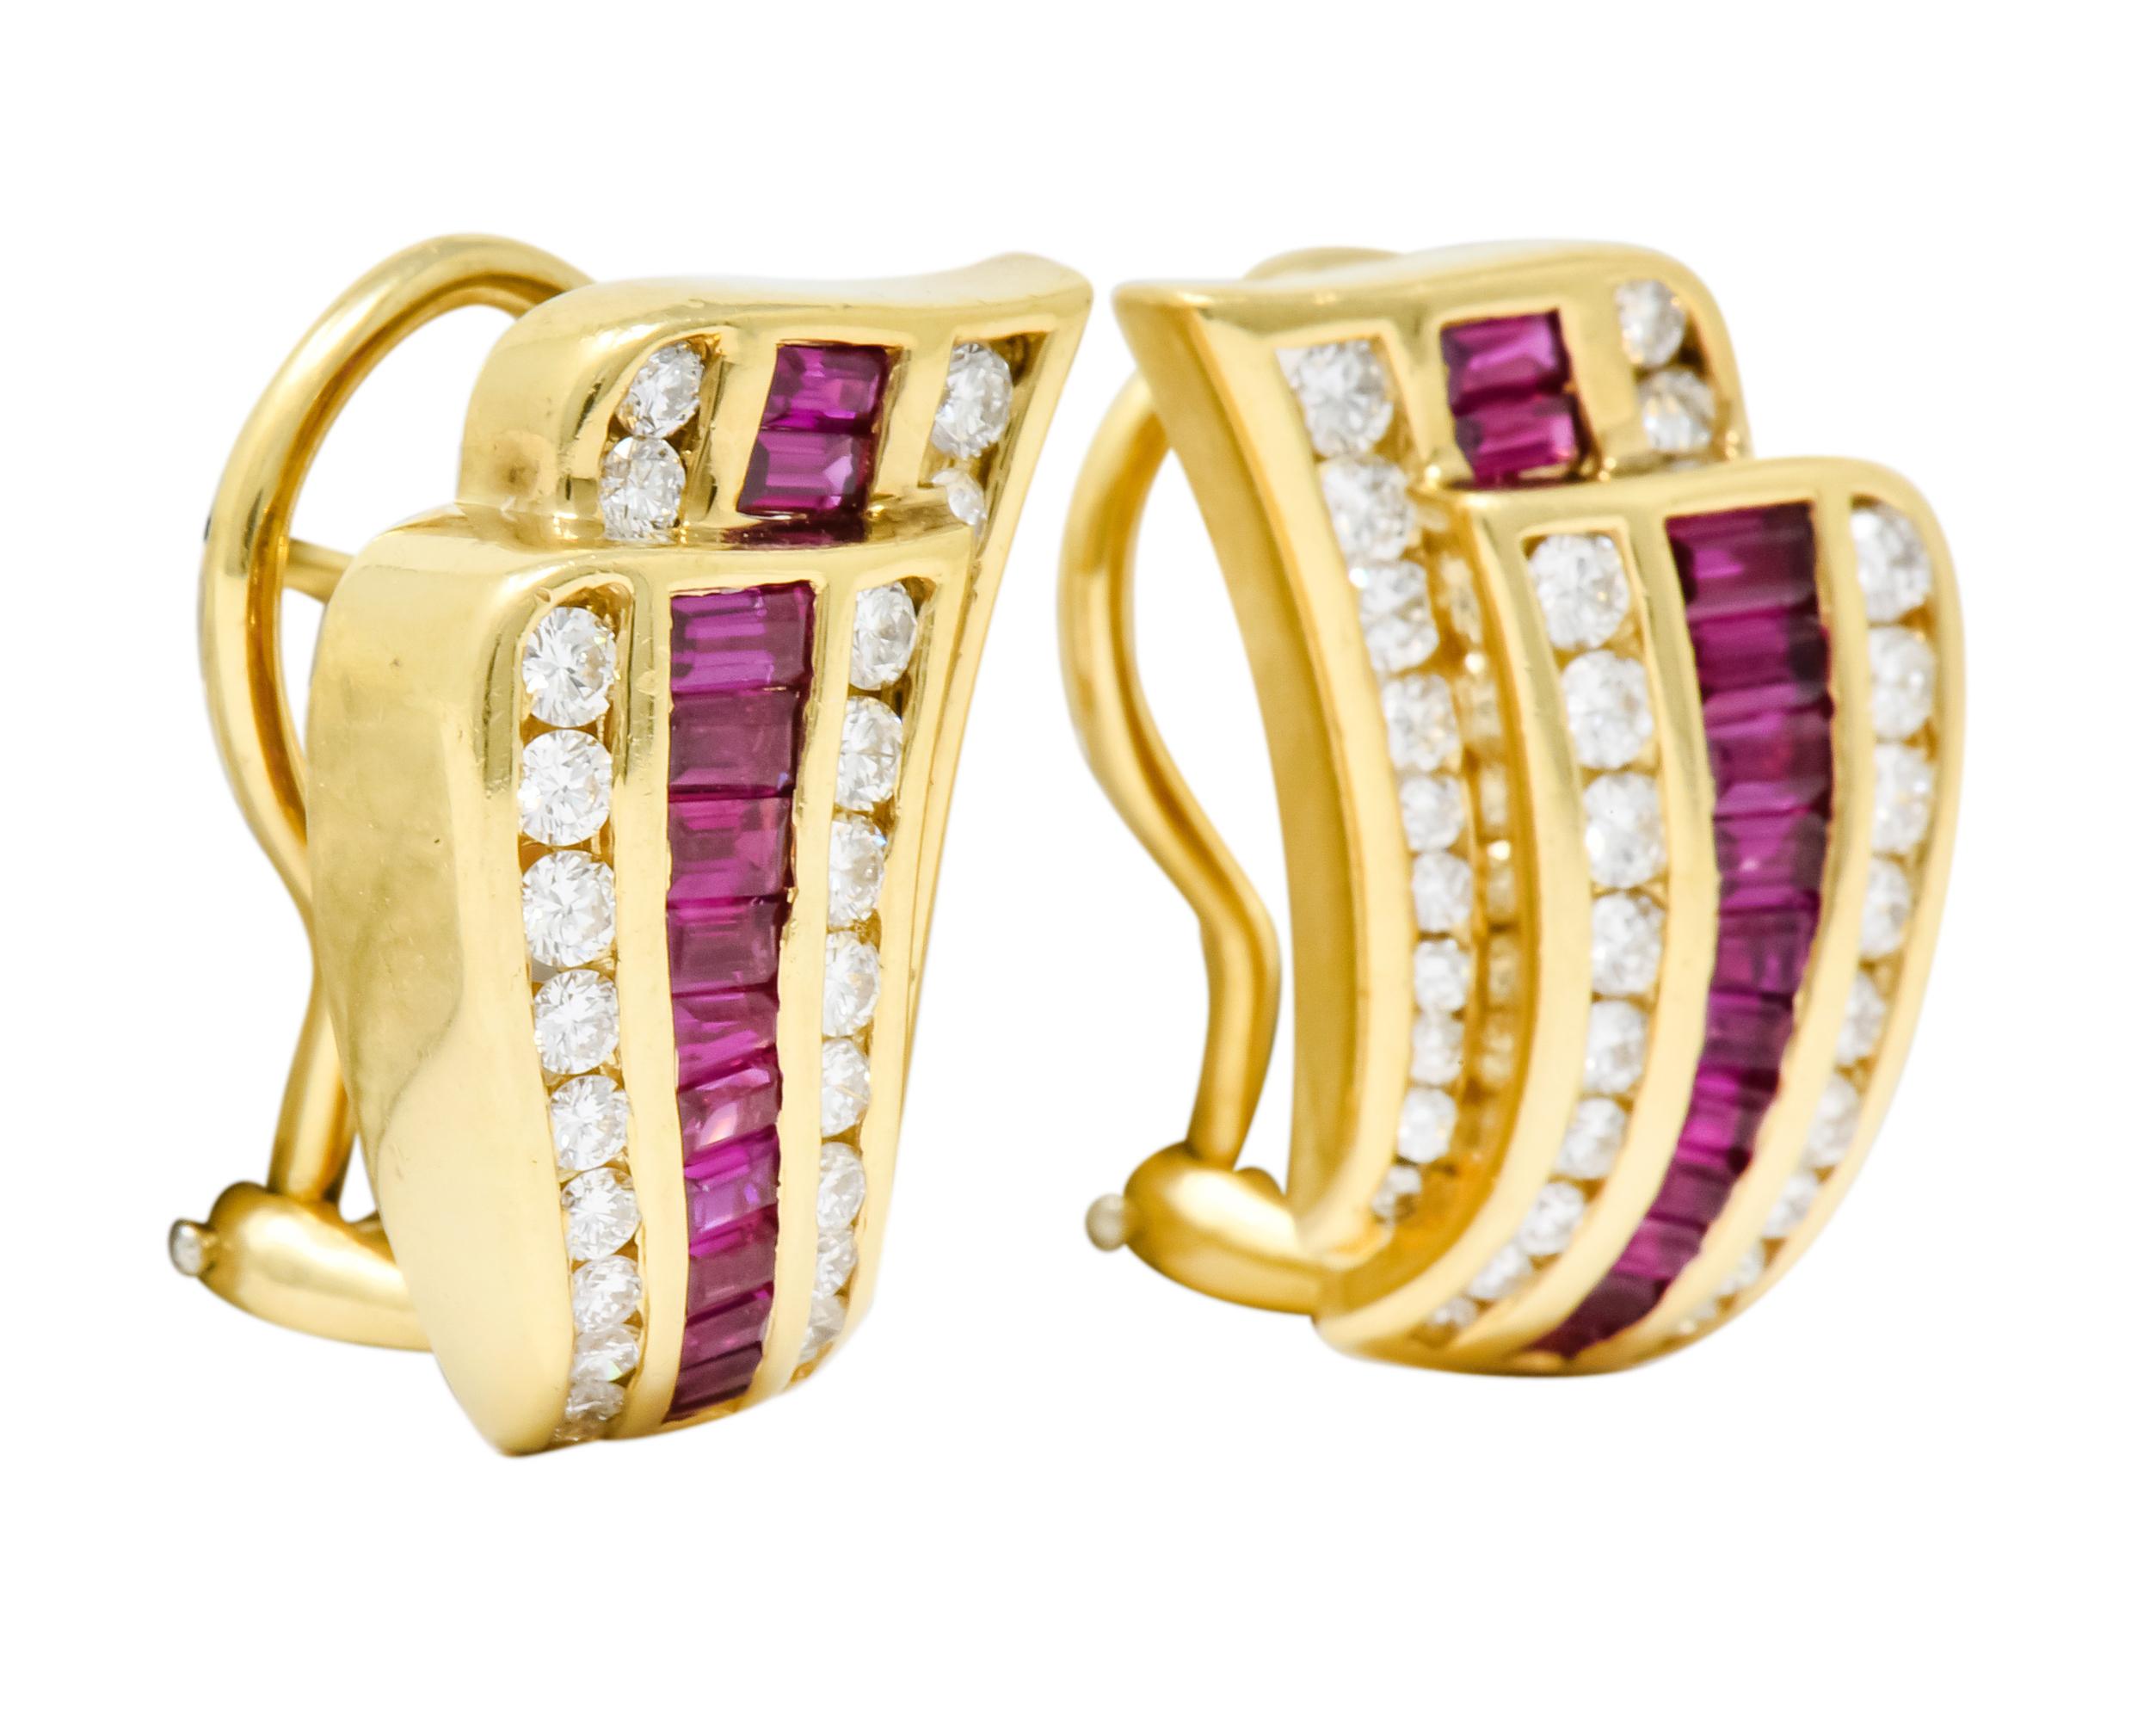 Earrings designed as two offset, curved, tapered formations with a polished gold finish

Centering a channel set row of baguette cut rubies weighing approximately 1.10 carat total, transparent and raspberry red in color

Flanked by channel set round